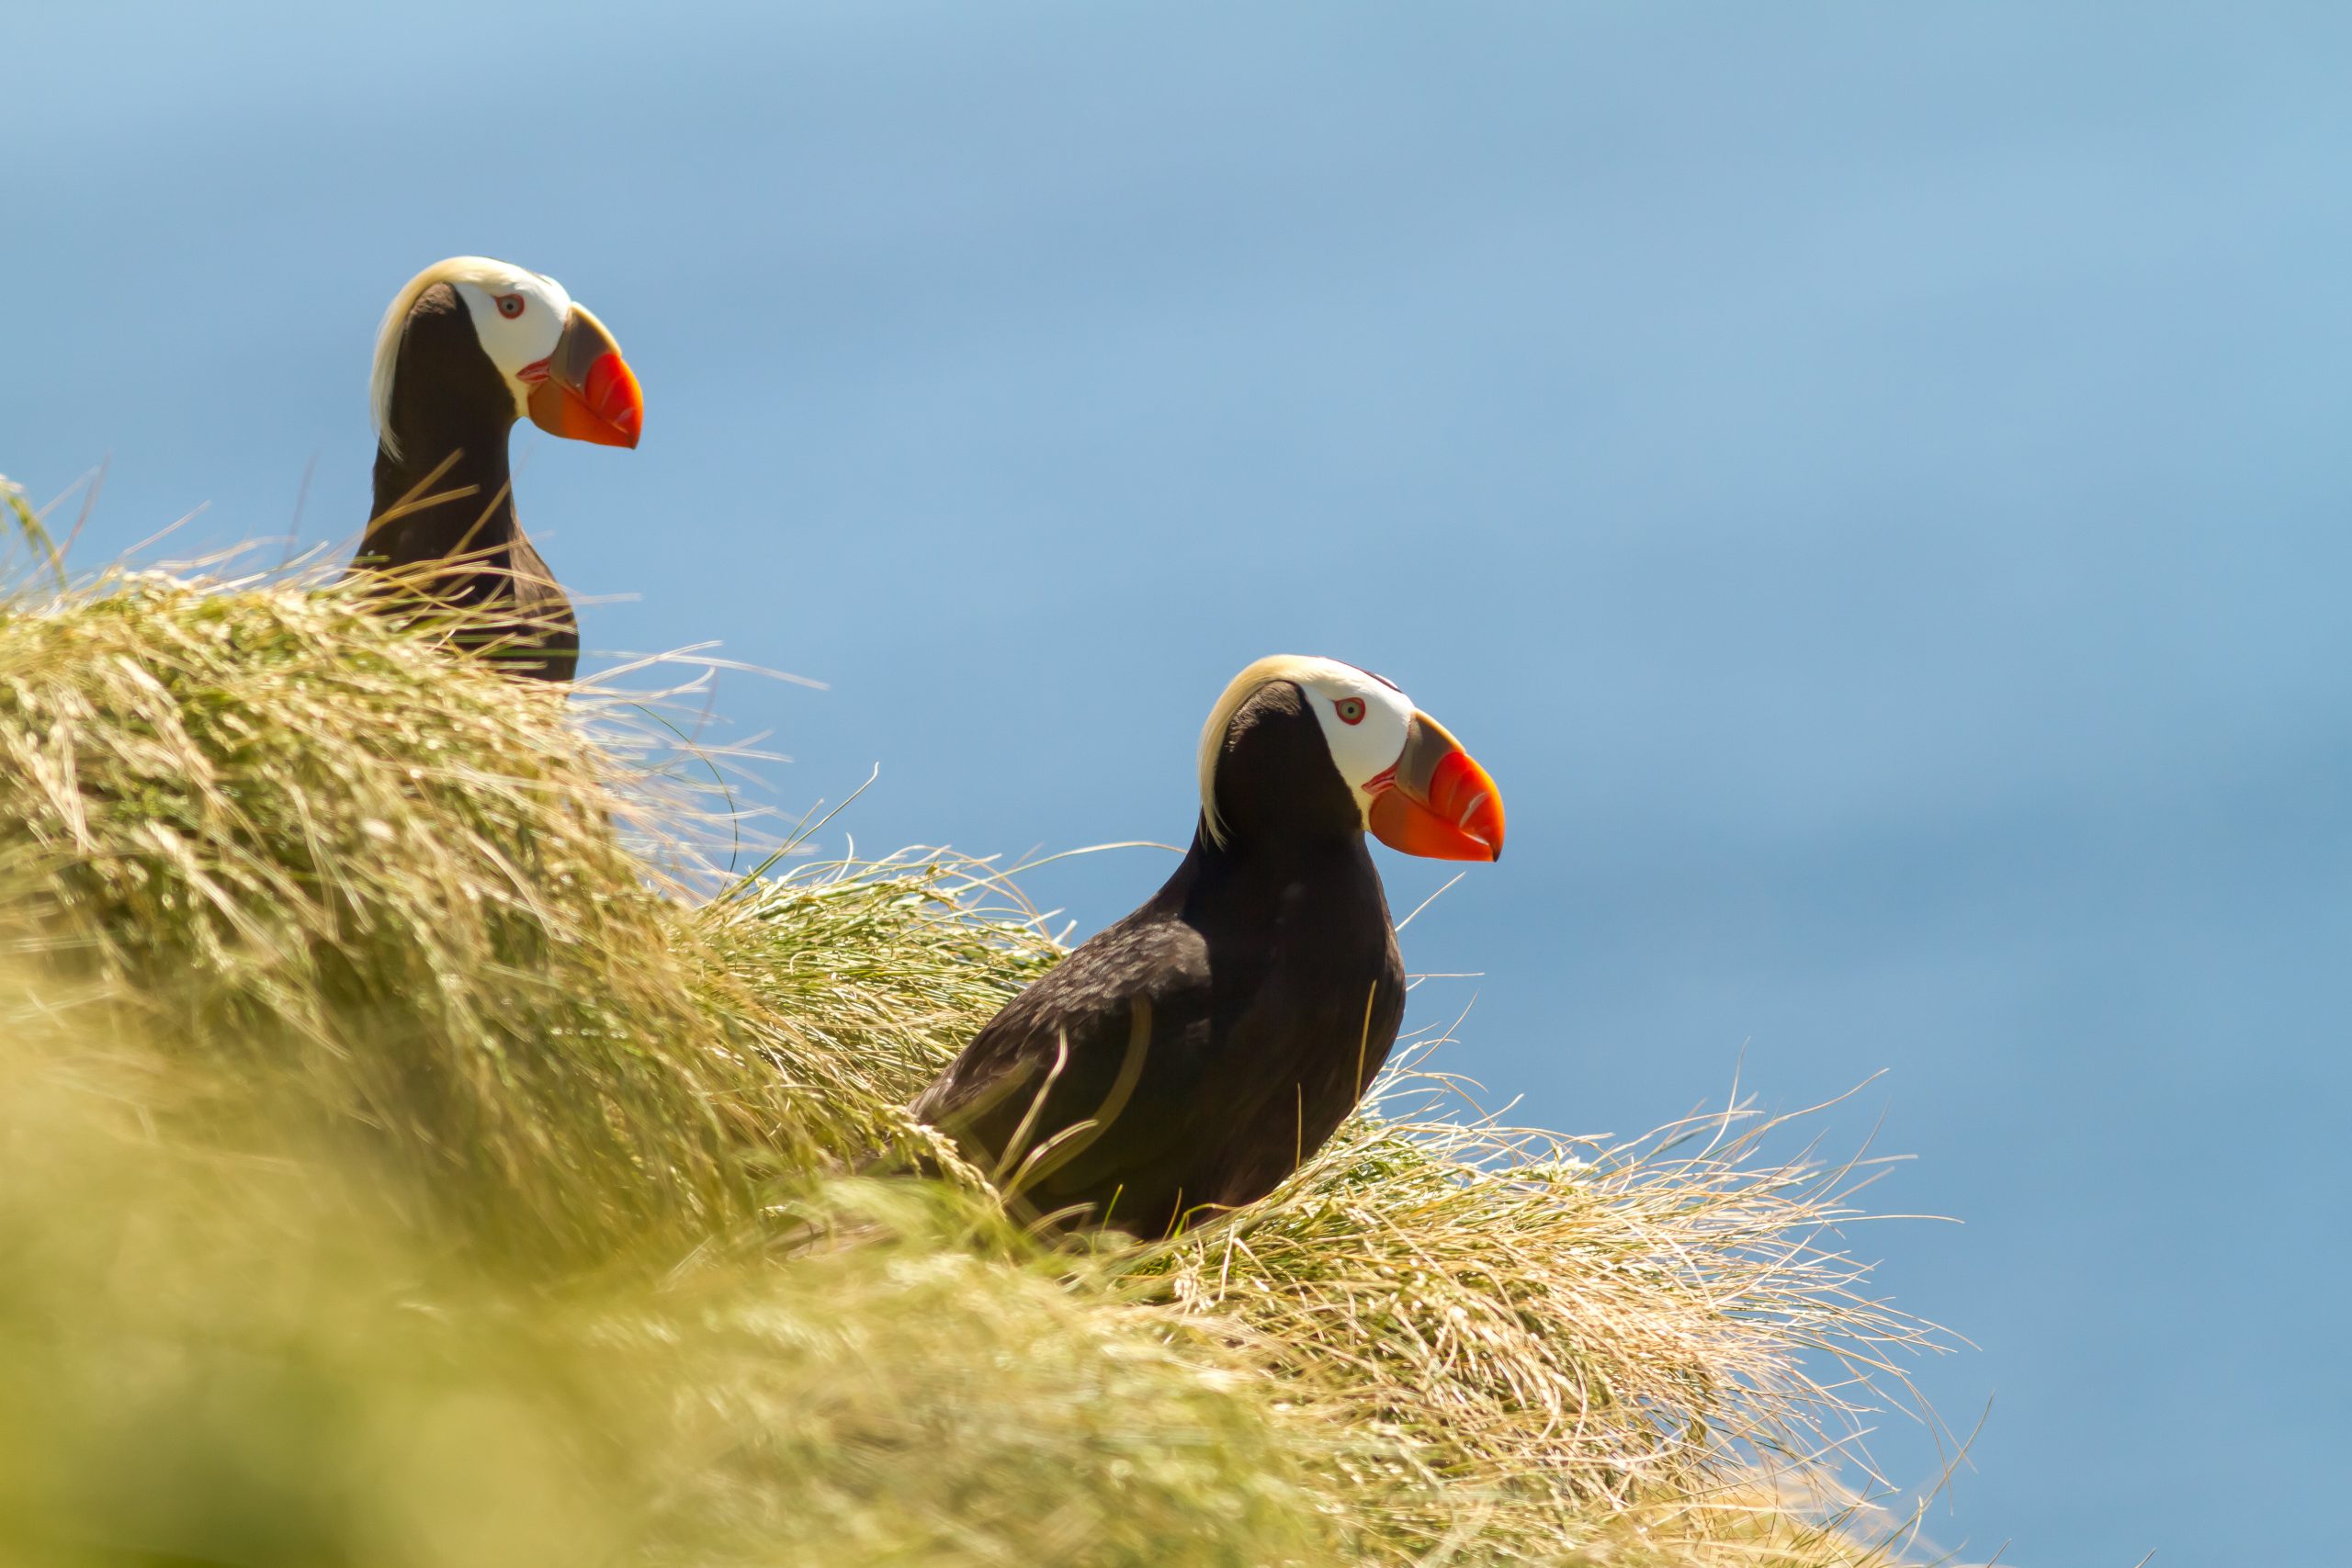 Two Tufted Puffins on a grassy island